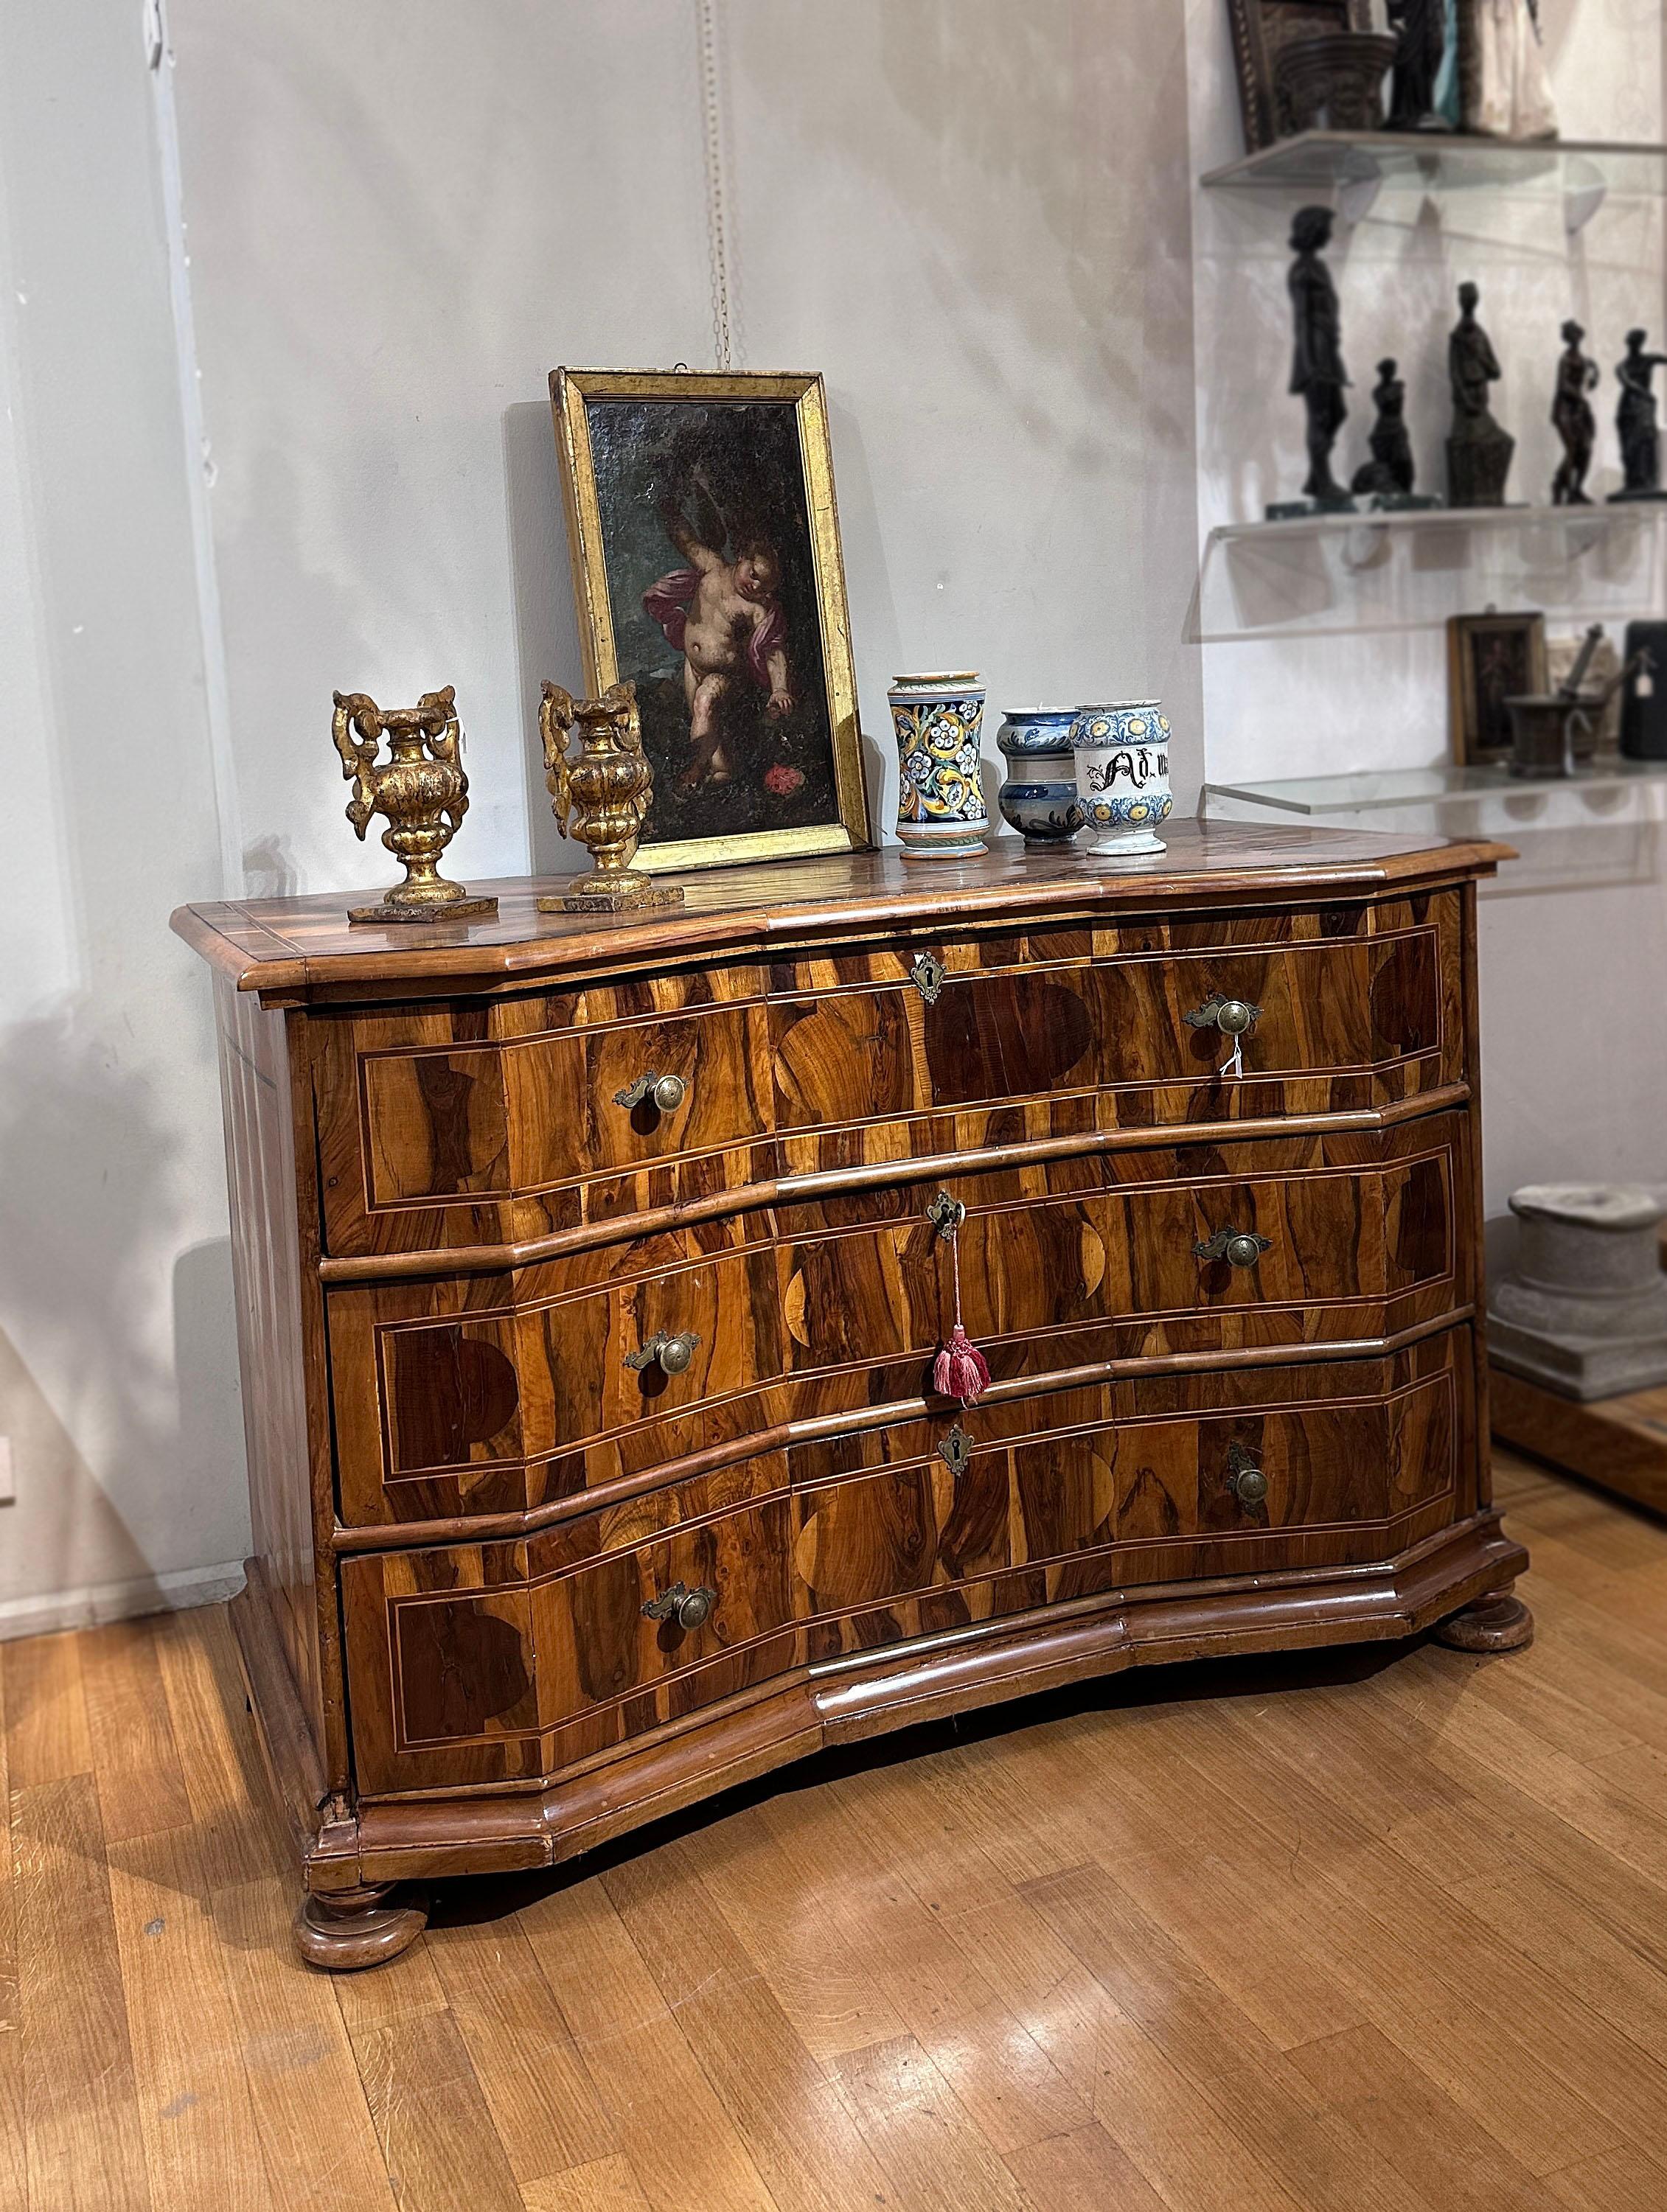 18th CENTURY VENETIAN VENEREED AND INLAID CHEST For Sale 3